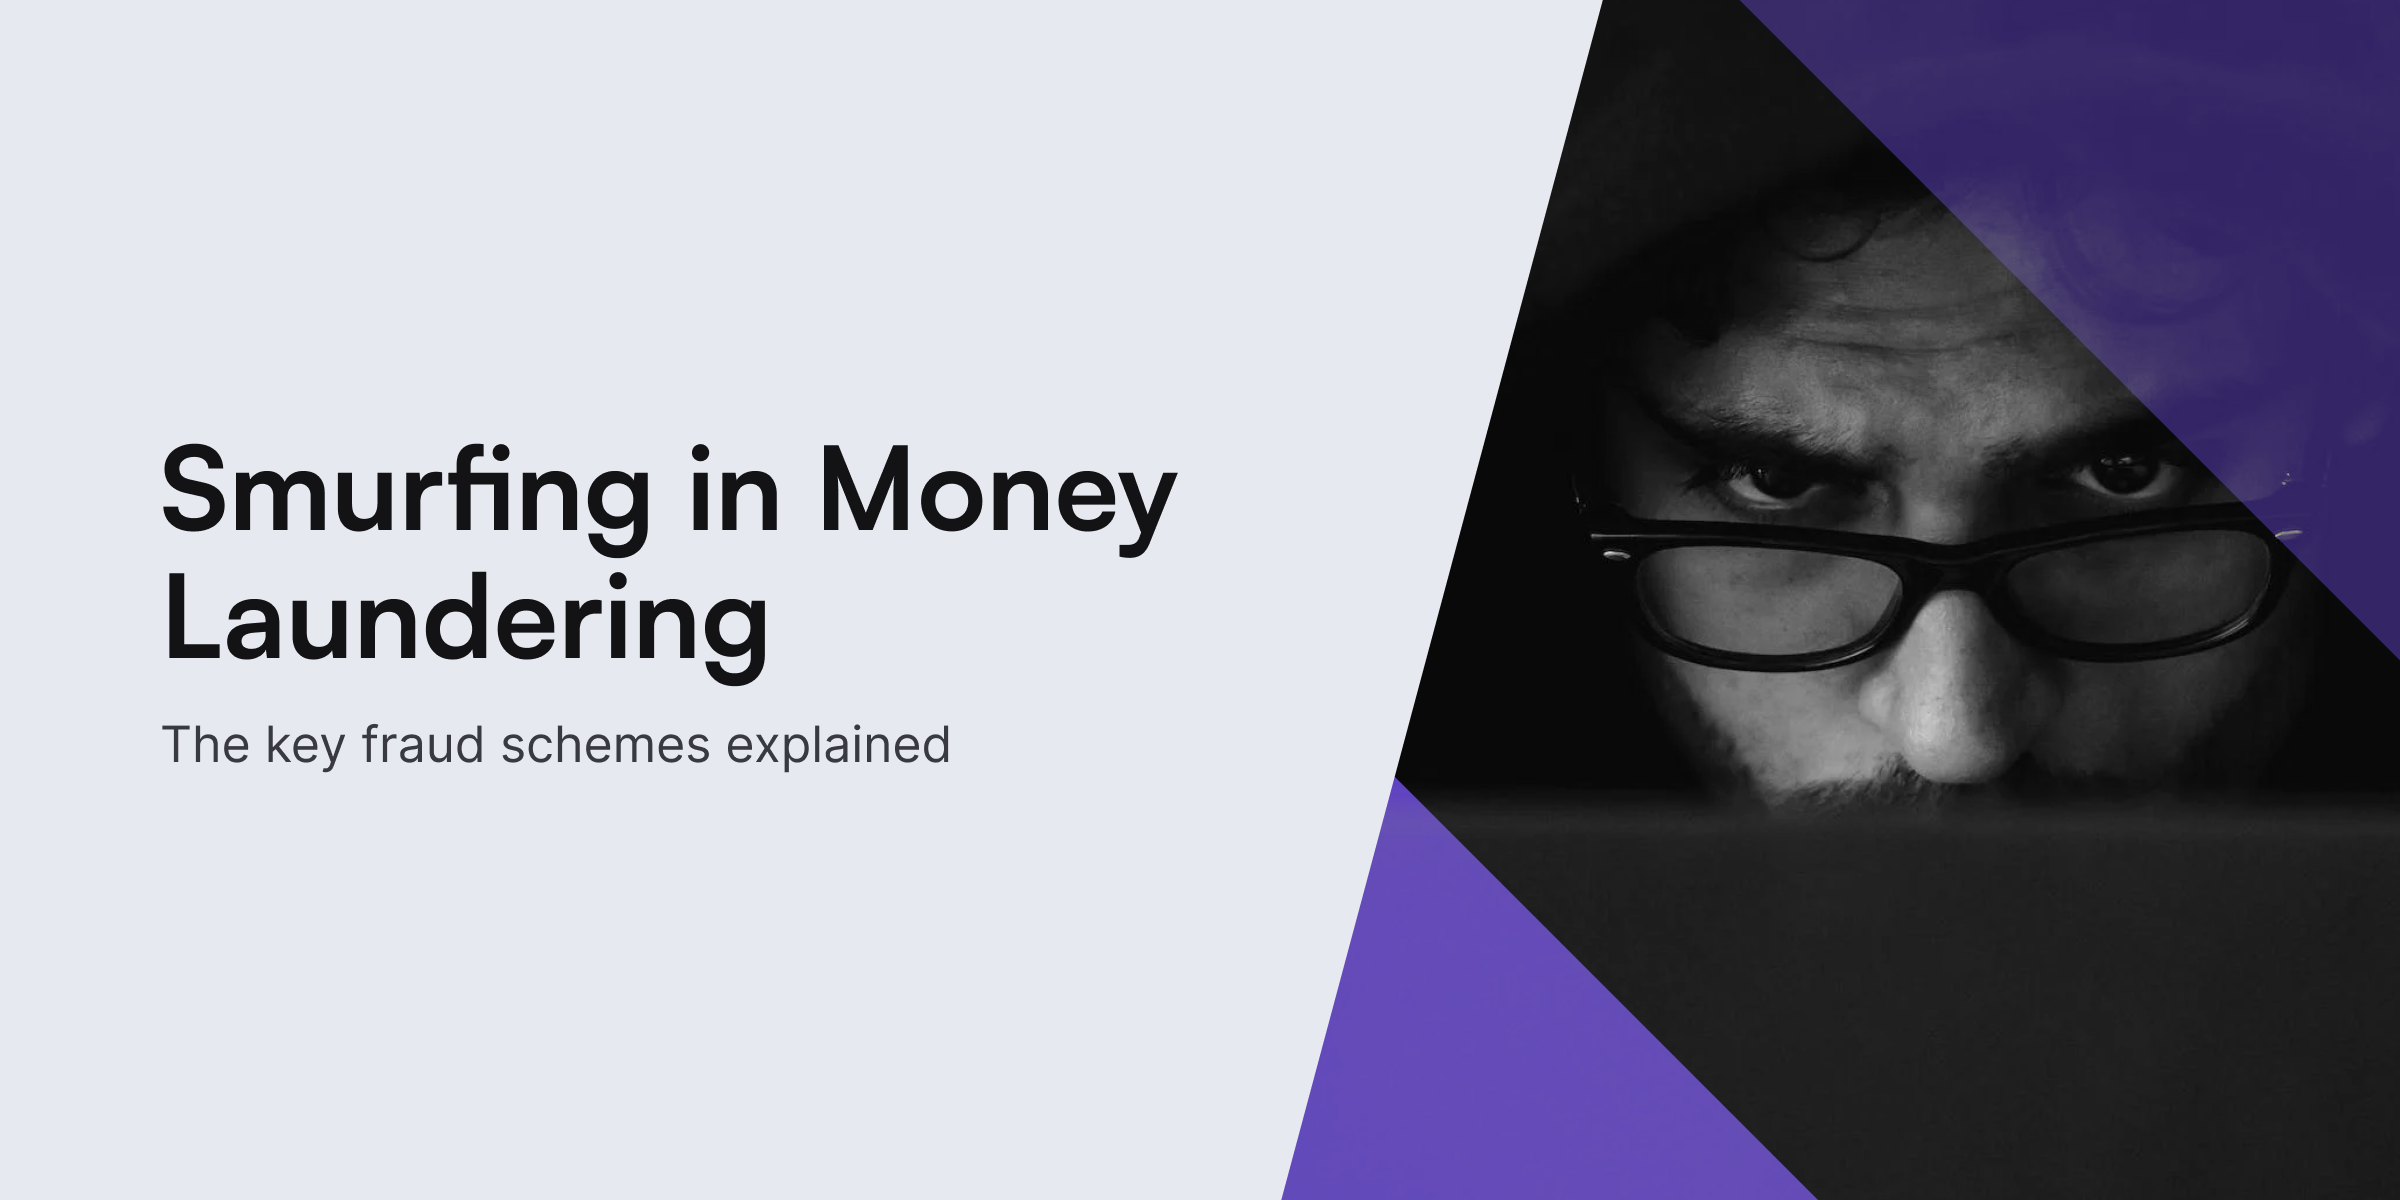 Top 5 Industries That Need to Know About Smurfing Money Laundering